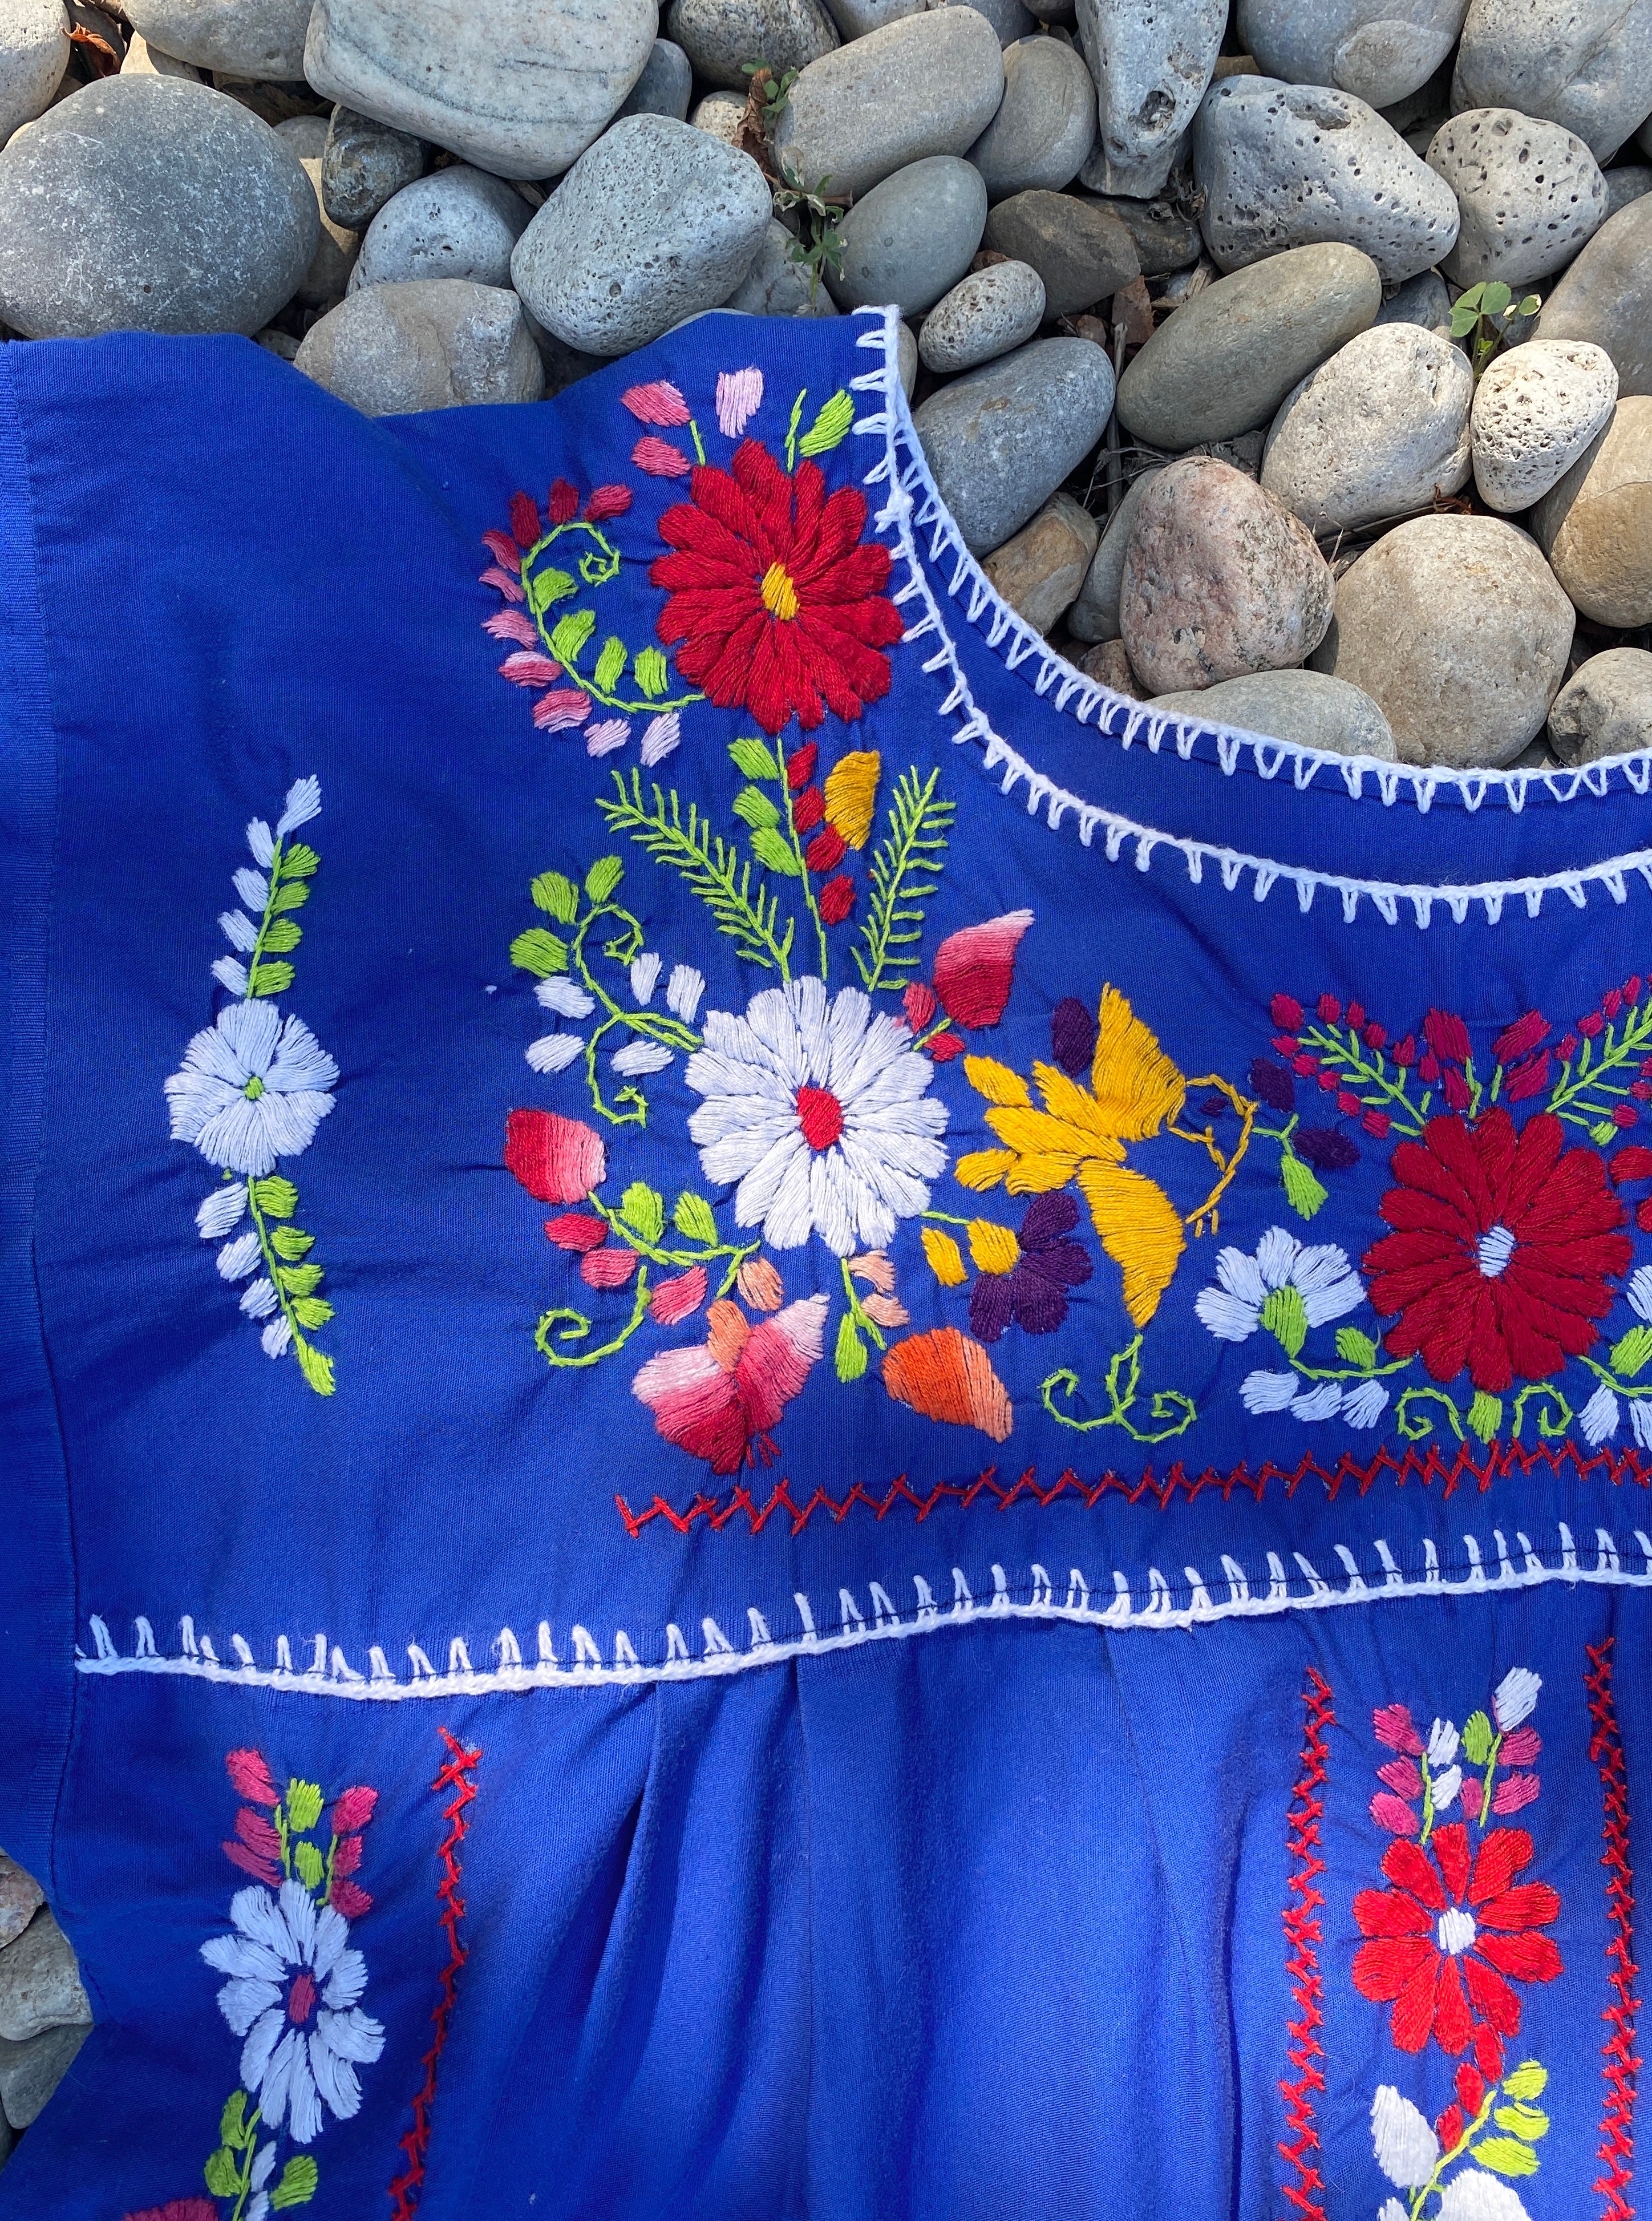 Vintage Mexican Embroidered Blue Dress